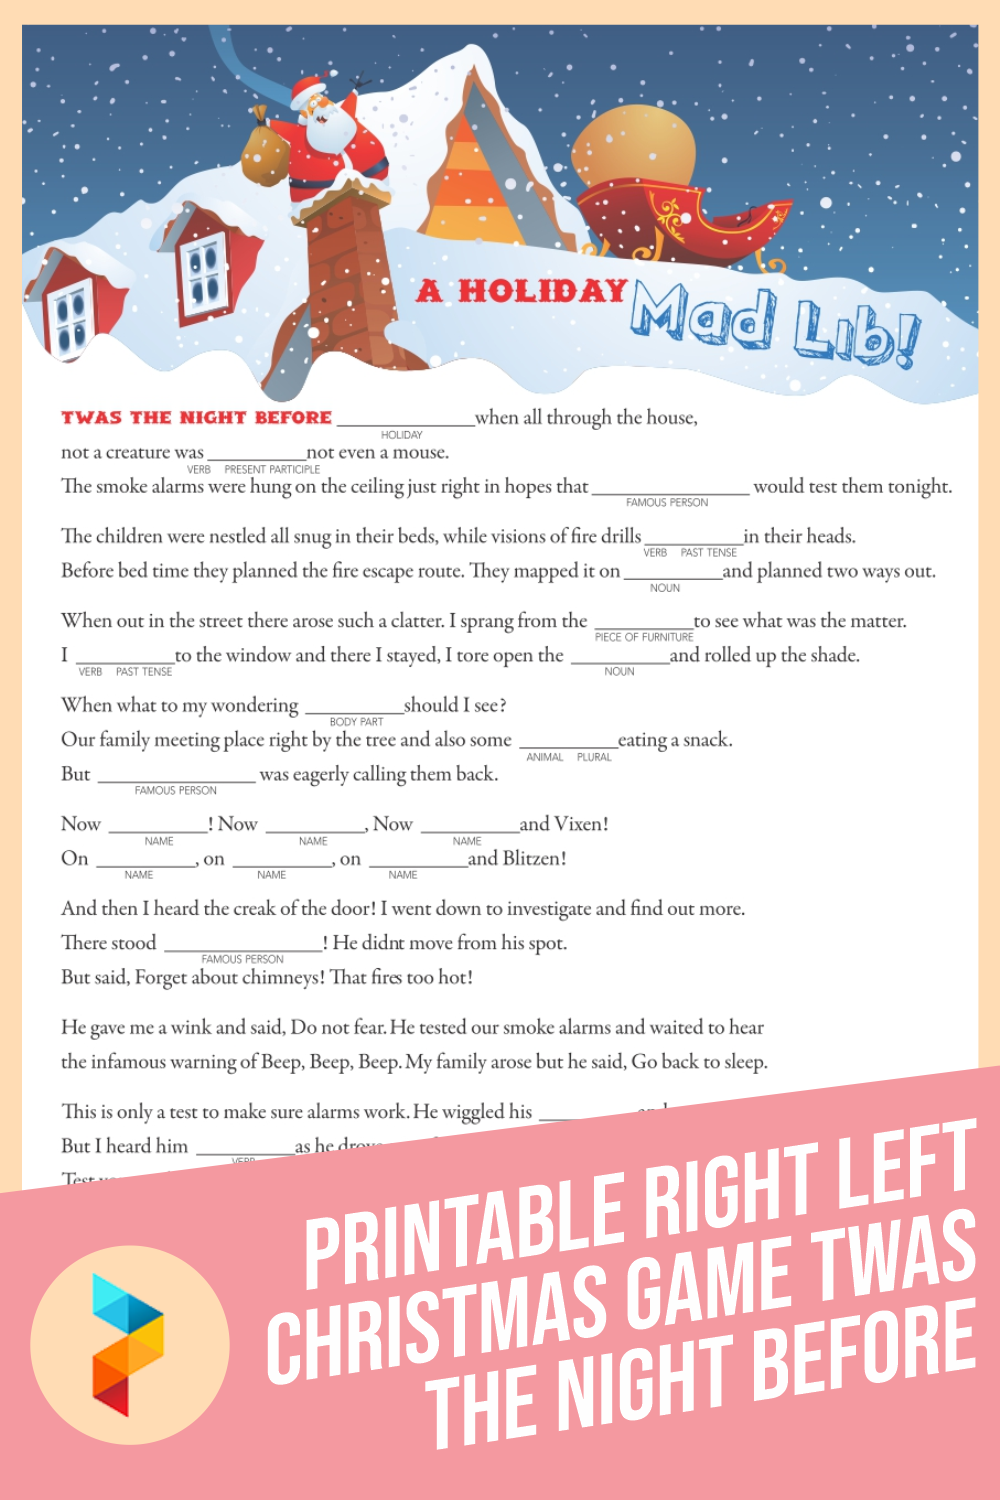 9-best-printable-right-left-christmas-game-twas-the-night-before